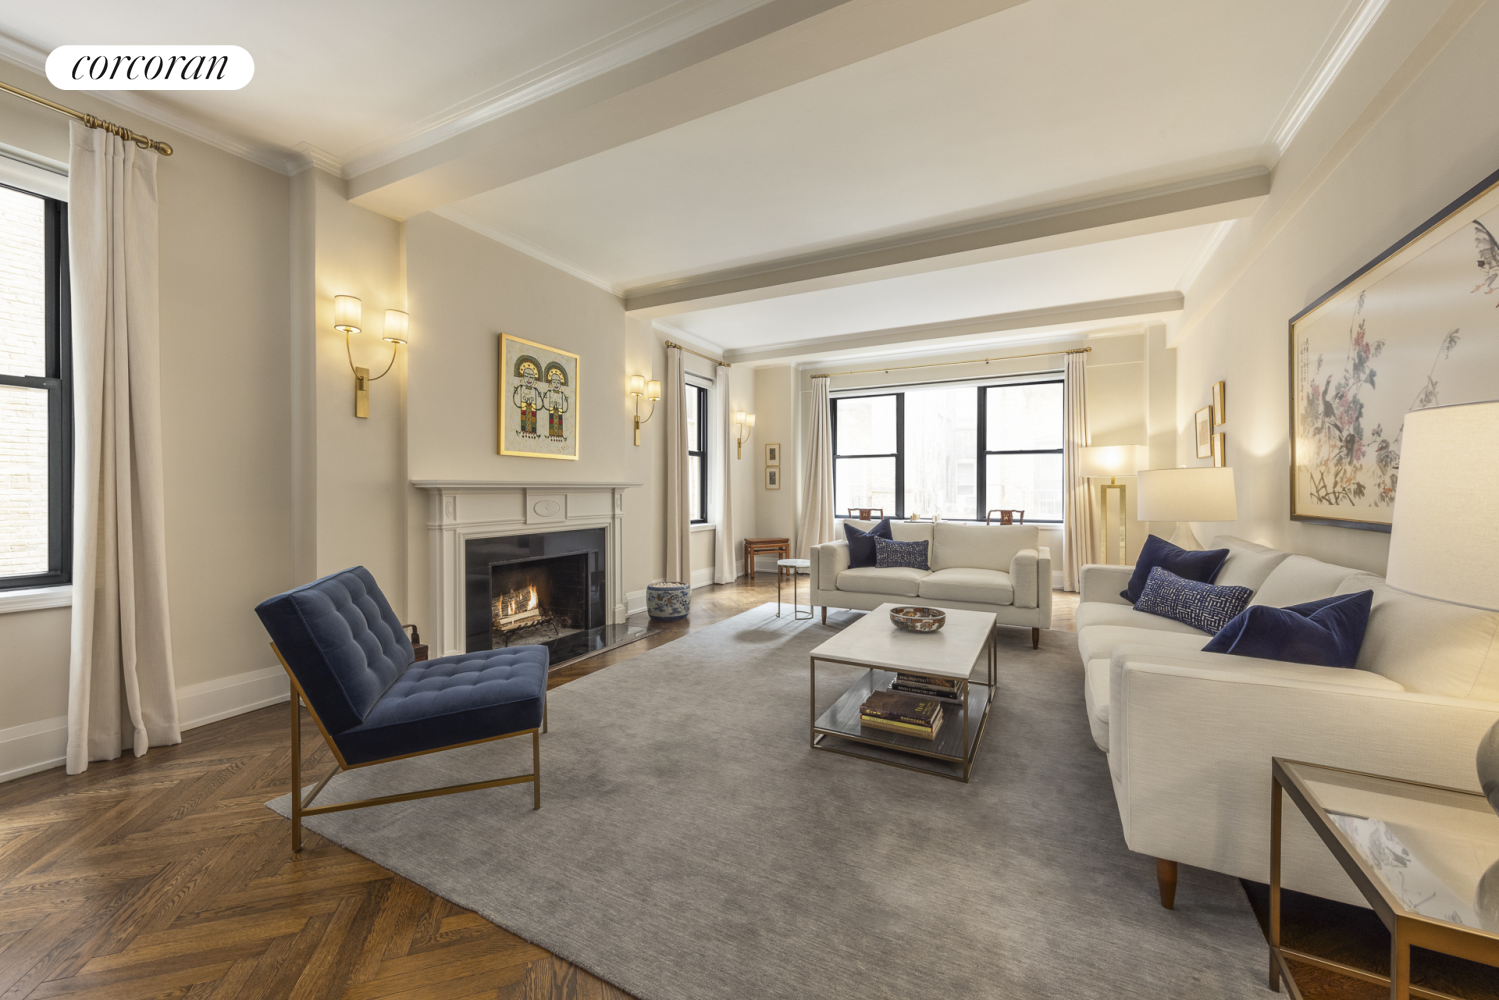 1095 Park Avenue 3A, Carnegie Hill, Upper East Side, NYC - 2 Bedrooms  
3 Bathrooms  
6 Rooms - 